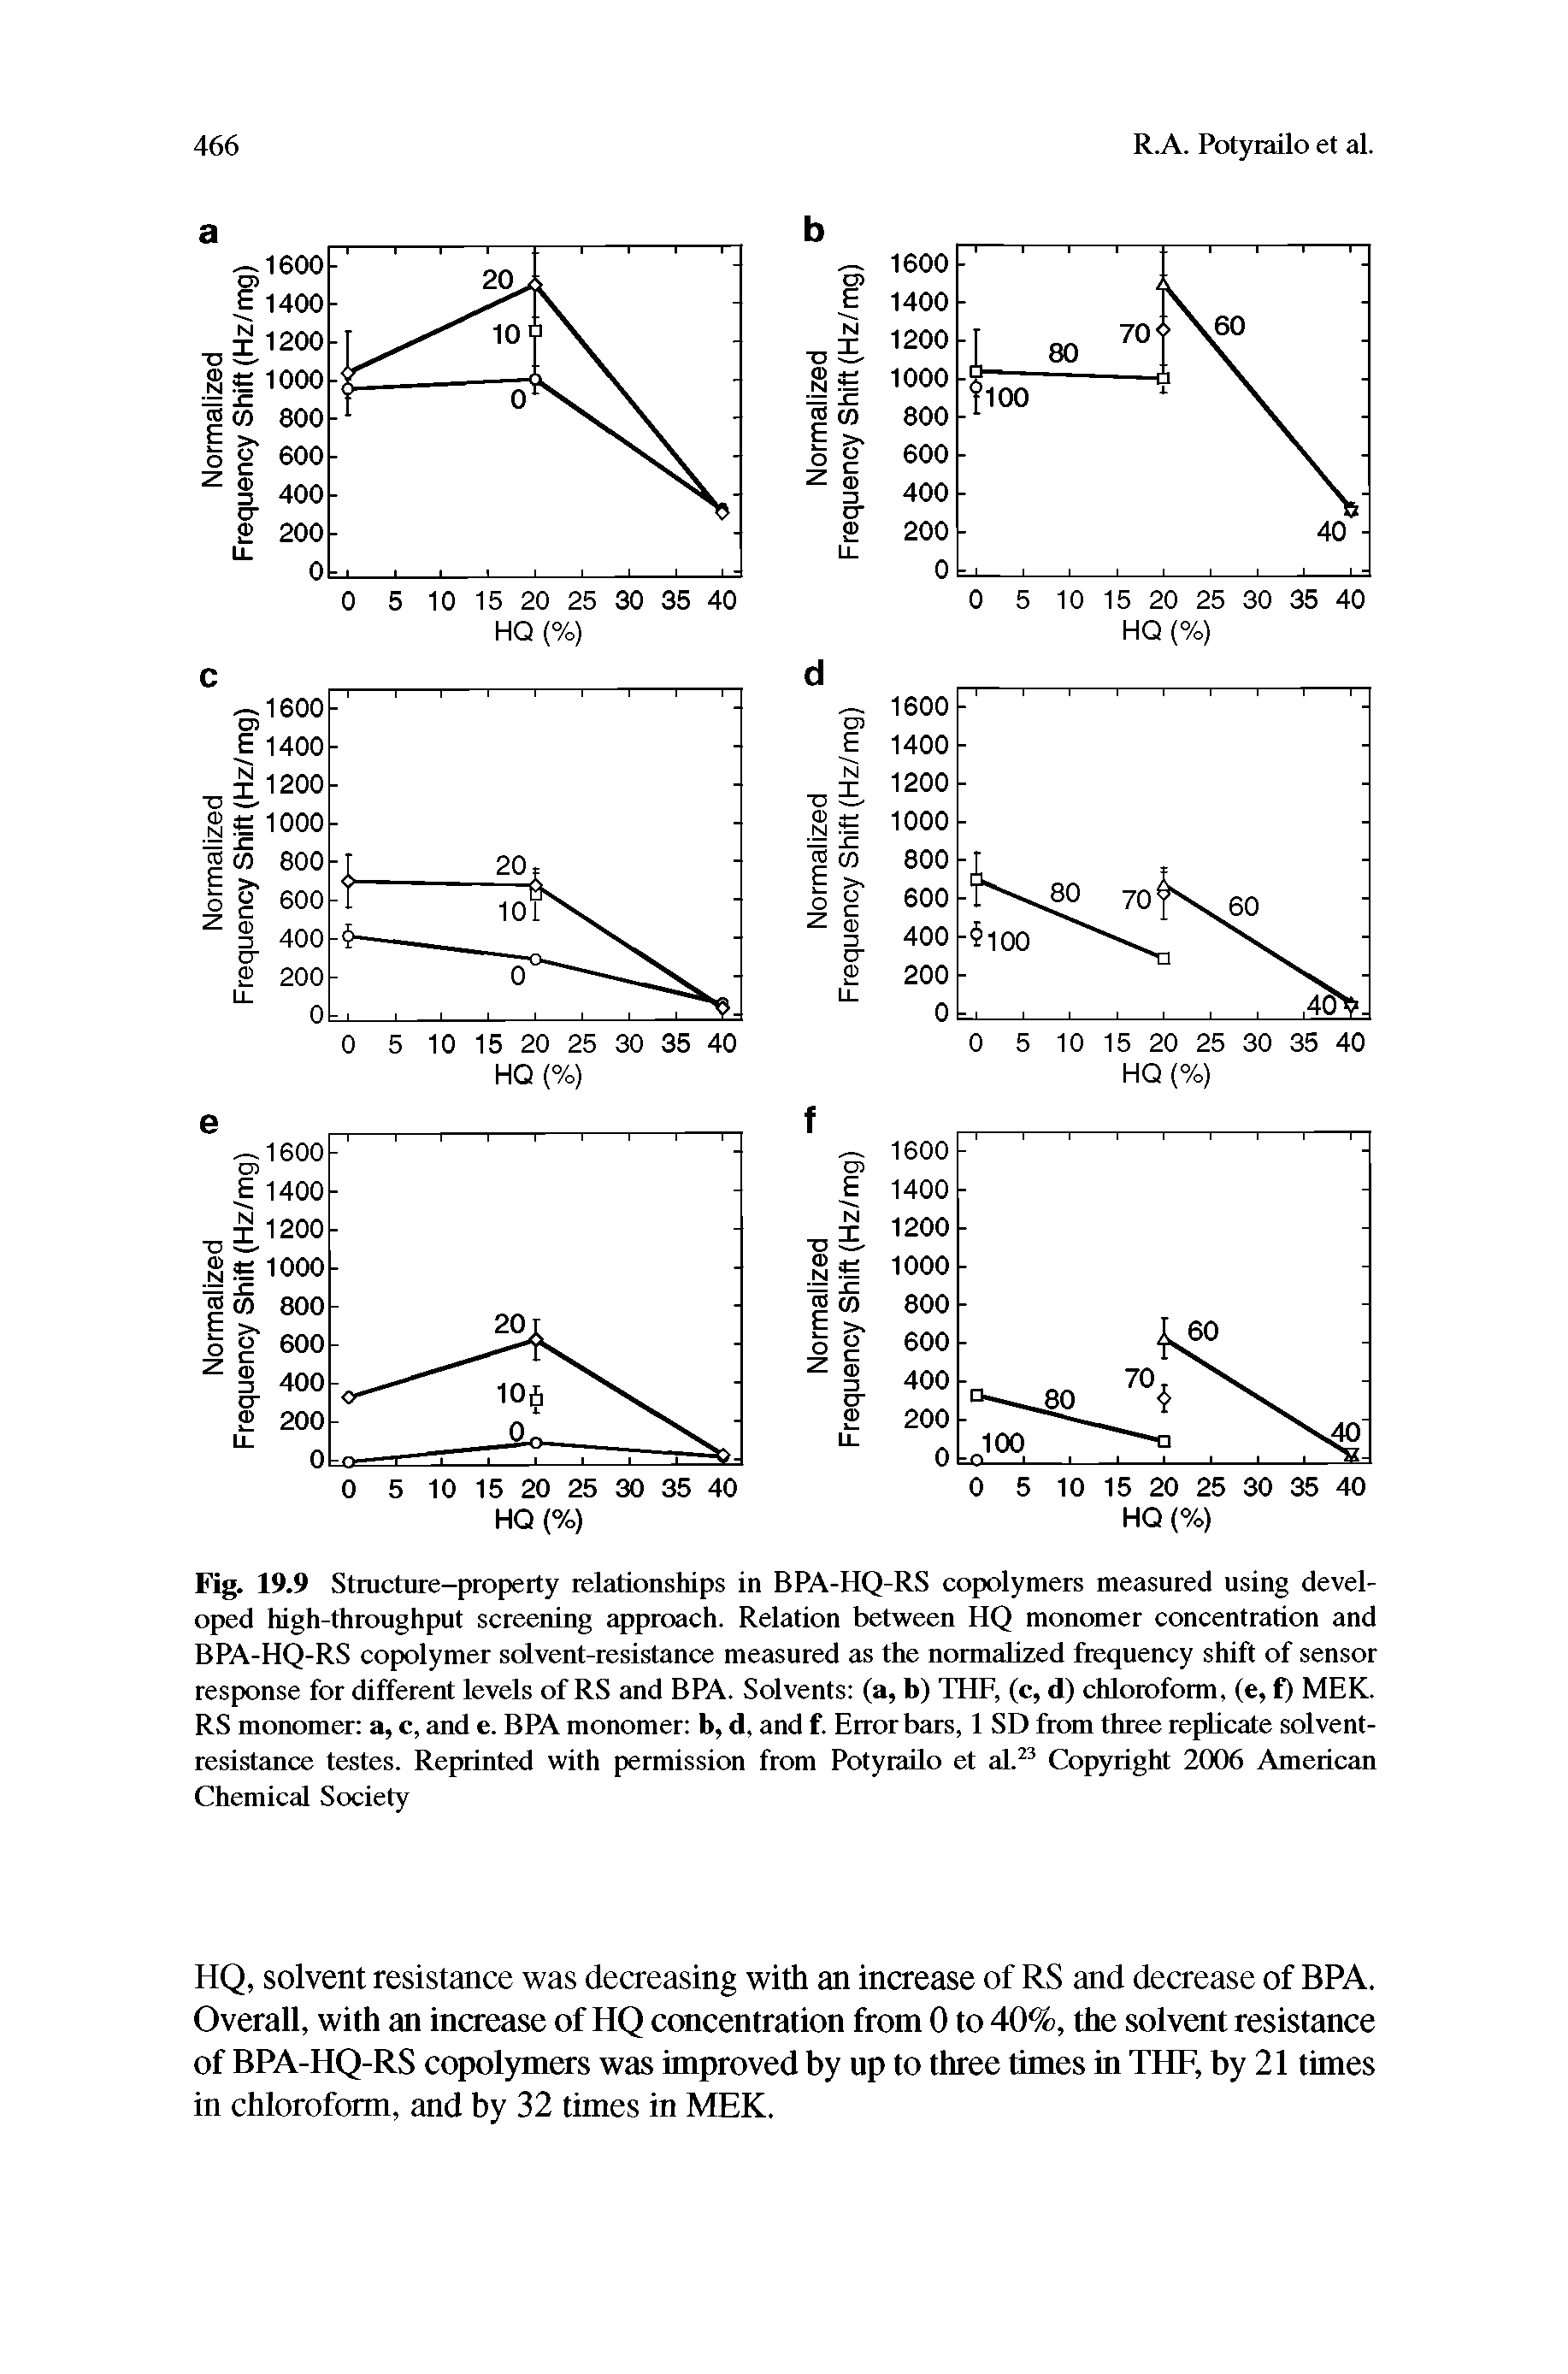 Fig. 19.9 Structure-property relationships in BPA-HQ-RS copolymers measured using developed high-throughput screening approach. Relation between HQ monomer concentration and BPA-HQ-RS copolymer solvent-resistance measured as the normalized frequency shift of sensor response for different levels of RS and BPA. Solvents (a, b) THF, (c, d) chloroform, (e, f) MEK. RS monomer a, c, and e. BPA monomer b, d, and f. Error bars, 1 SD from three replicate solvent-resistance testes. Reprinted with permission from Potyrailo et al.23 Copyright 2006 American Chemical Society...